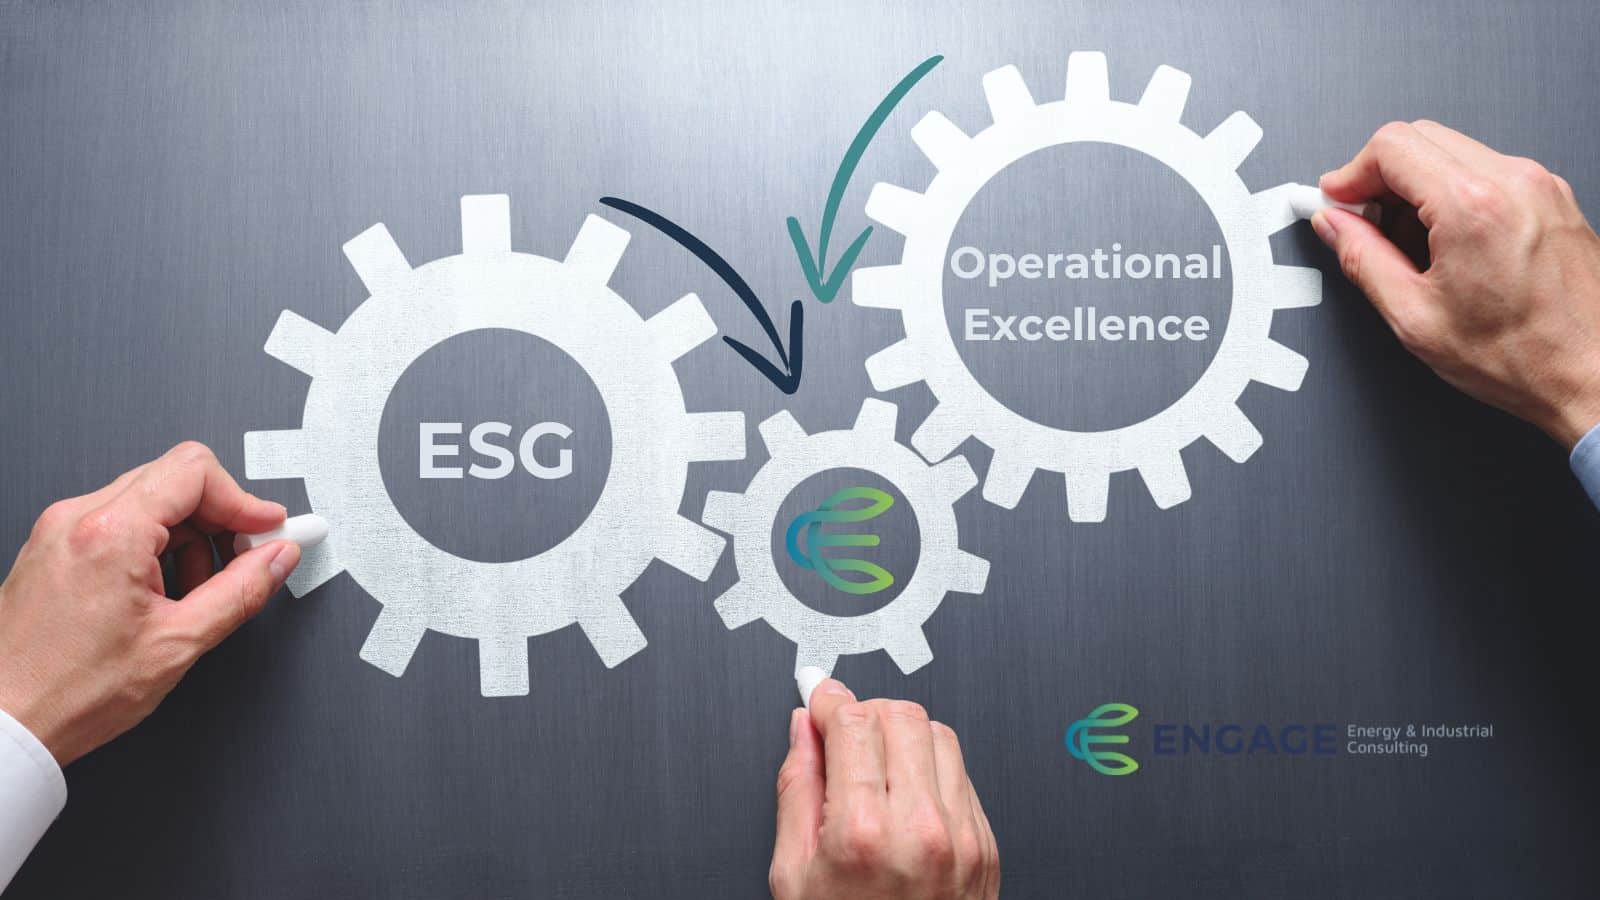 Three gears, one with ESG, second with Operational Excellence and third with the Engage Energy & Industrial Consulting icon where the gears intersect.